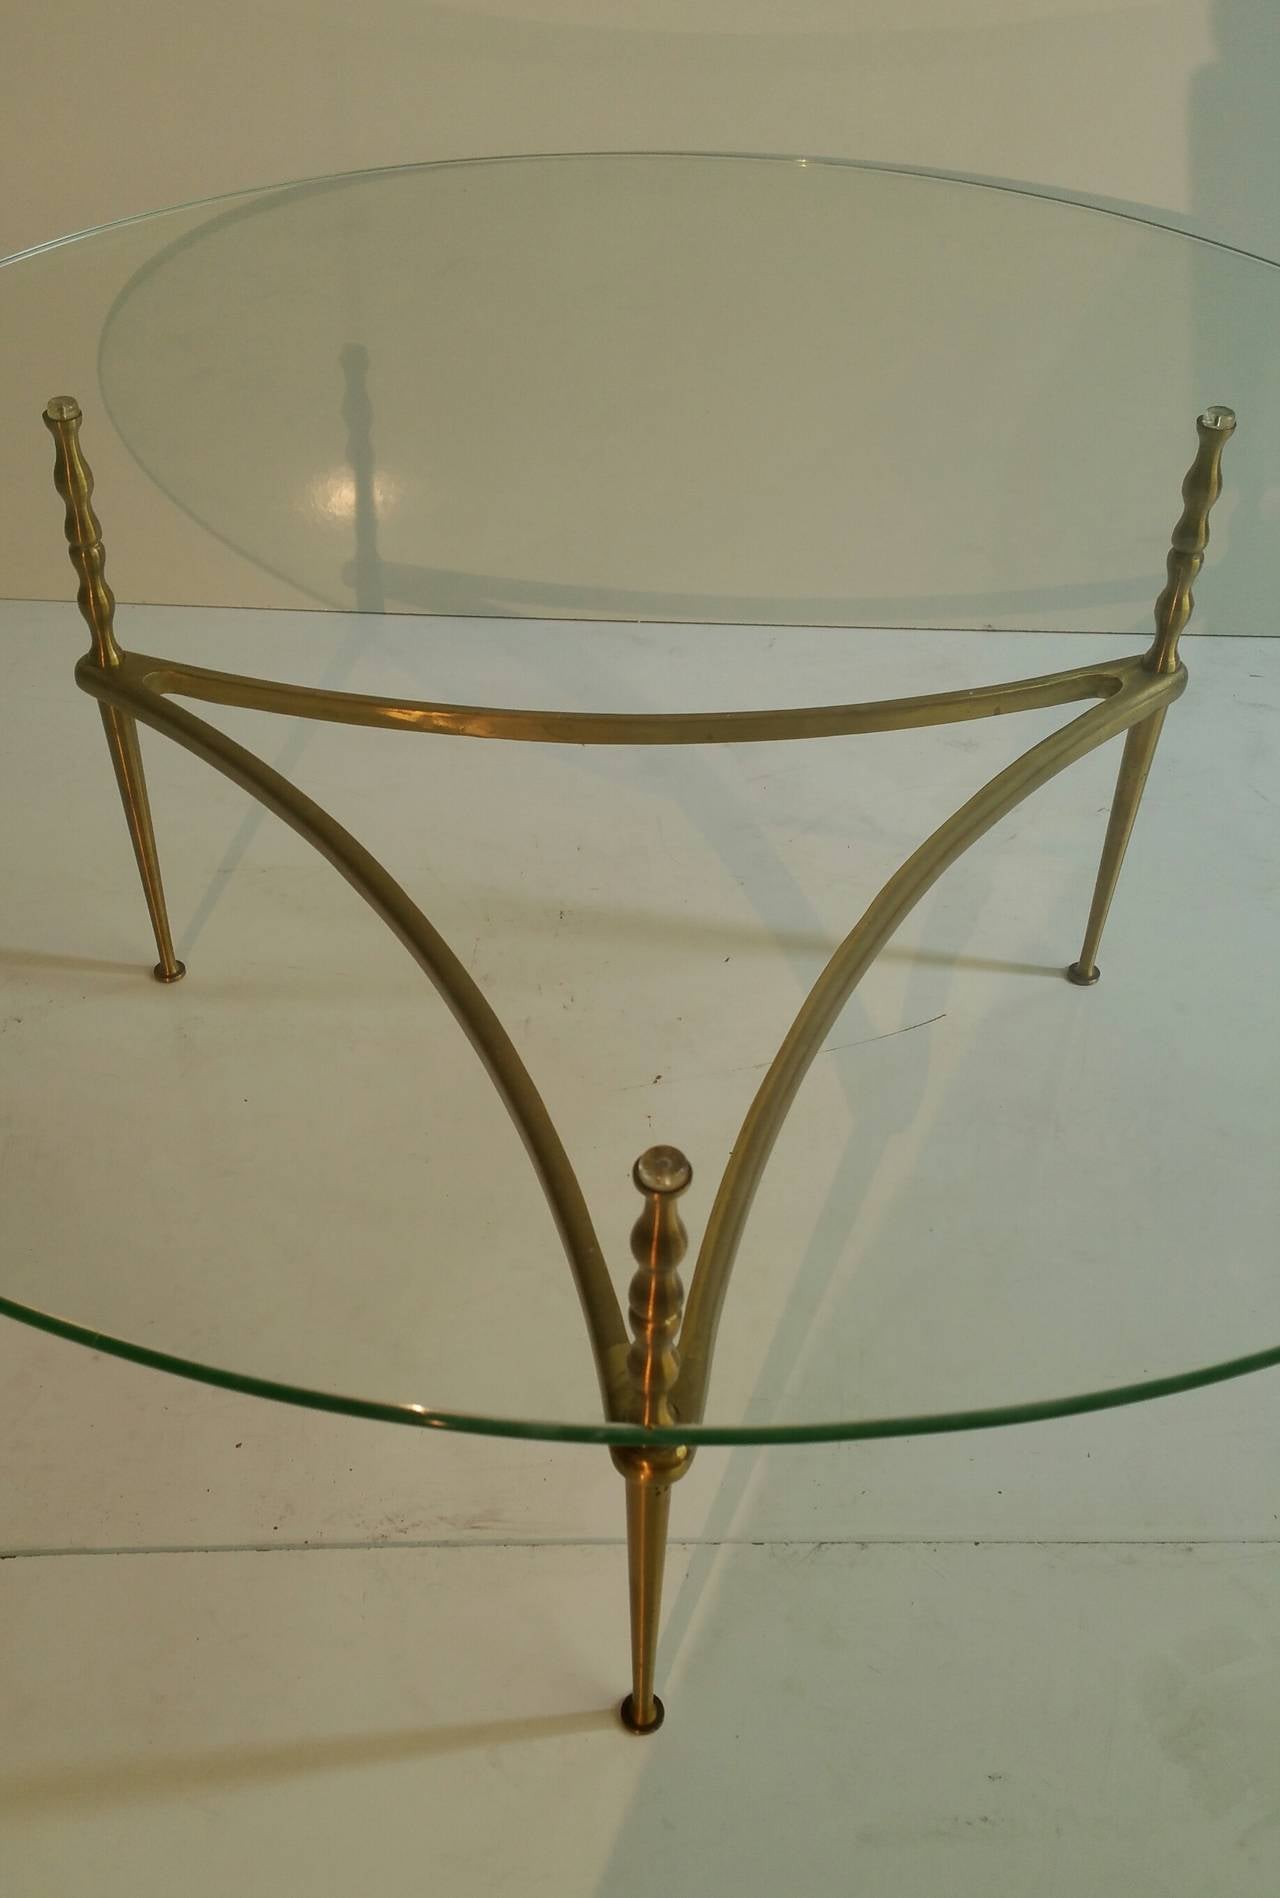 Elegant cocktail table, superior quality and construction. Brass and glass. Made in Italy.